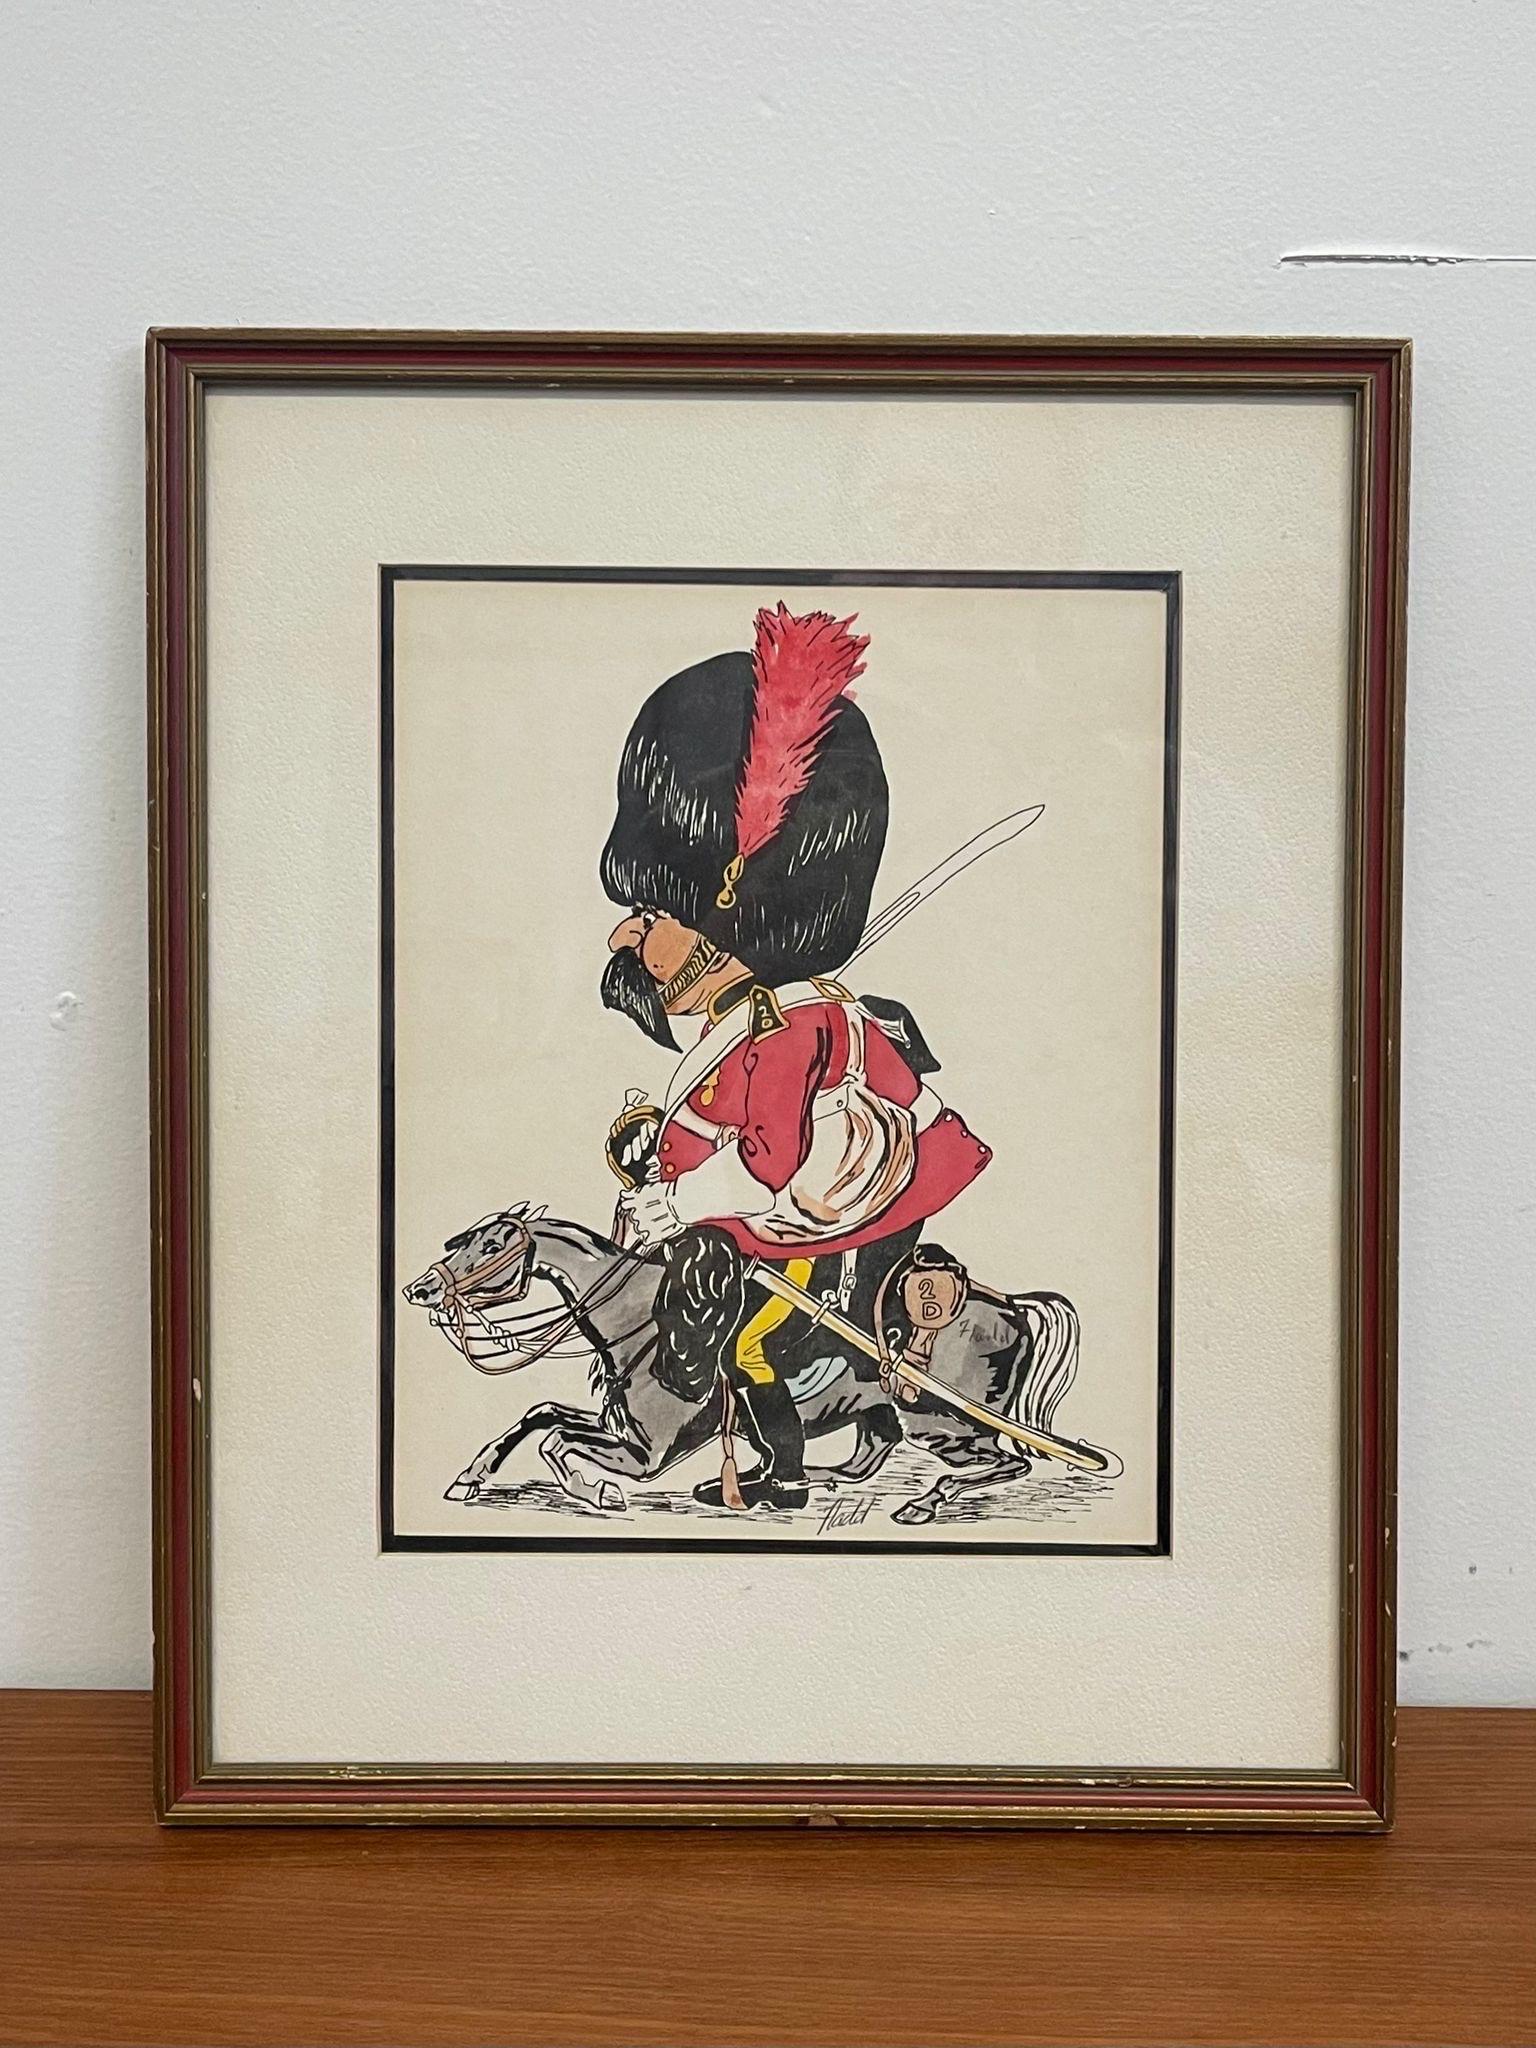 Vintage Illustration of British Soldier on Horse. Frame has Makers Mark on the Backyard. Vintage Condition Consistent with Age as Pictured.

Dimensions. 13 W ; 1/2 D ; 15 1/2 H